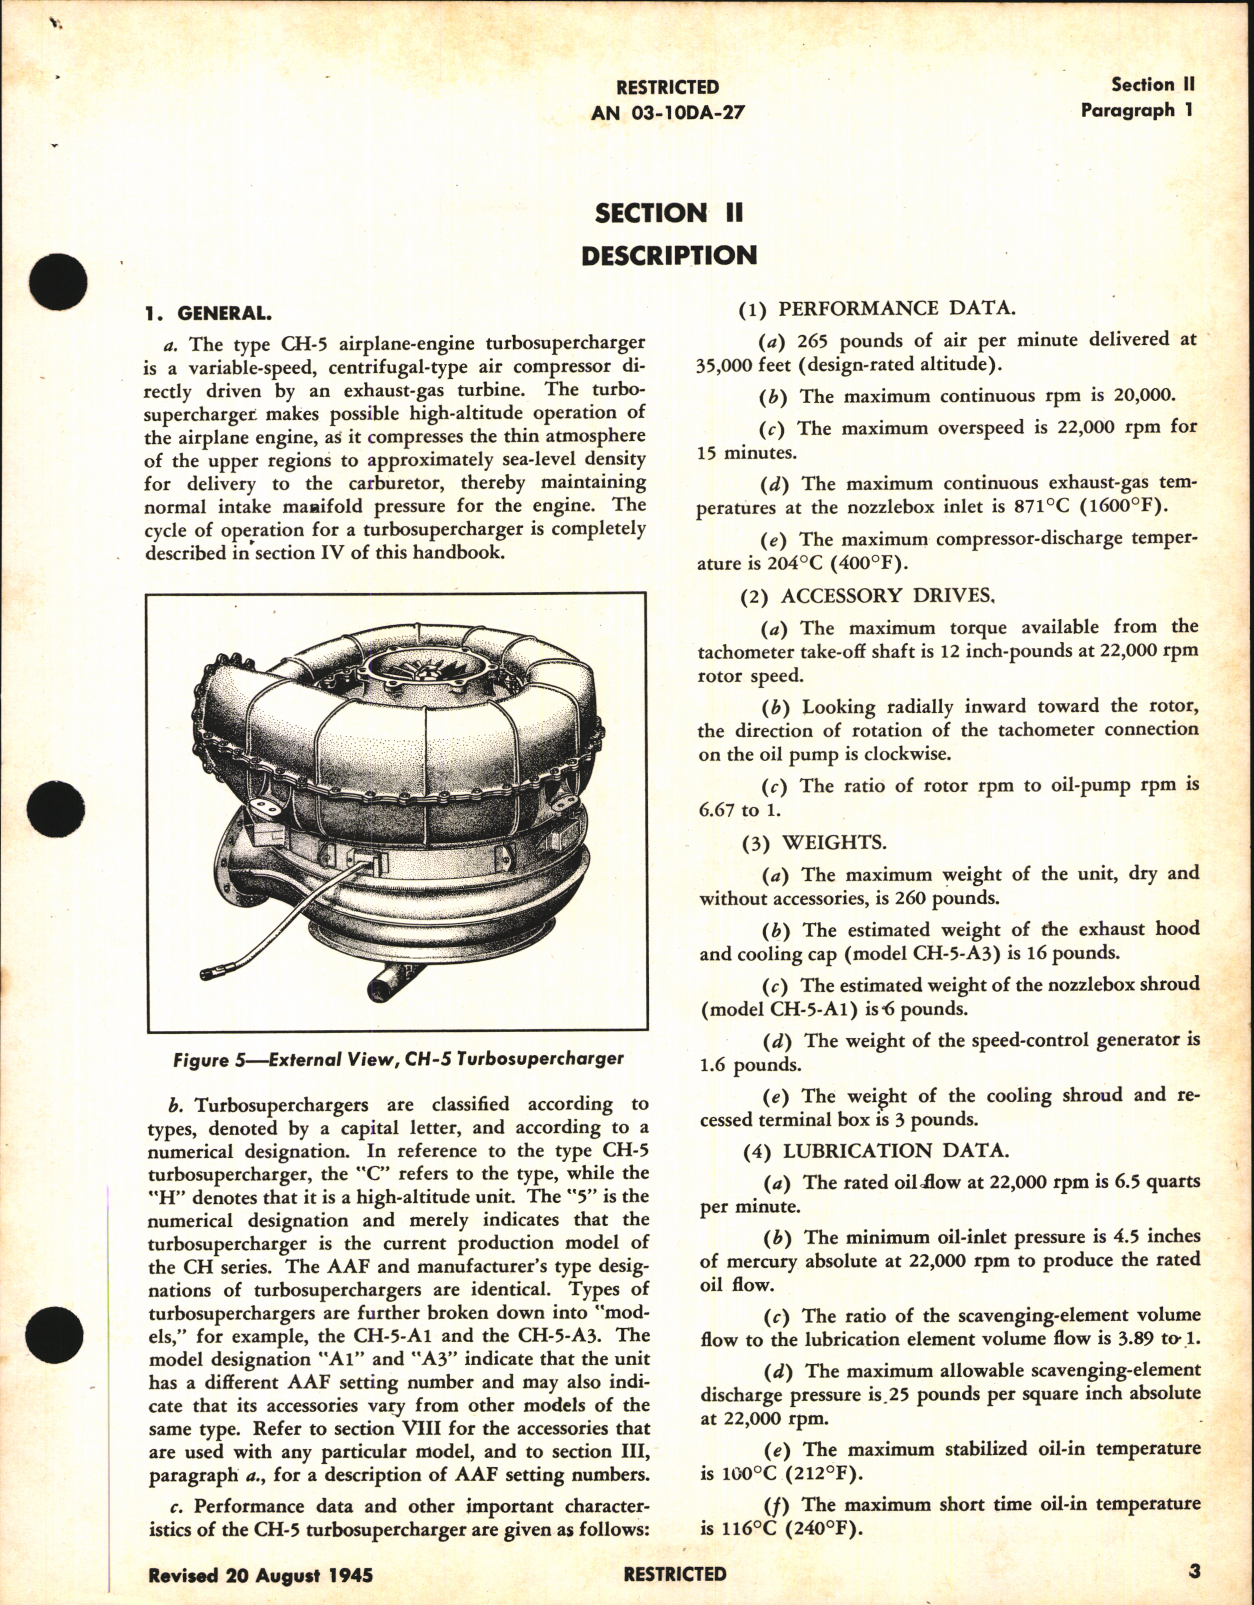 Sample page 7 from AirCorps Library document: Operation, Service, & Overhaul Instructions with Parts Catalog for Turbosuperchargers CH-5 Series